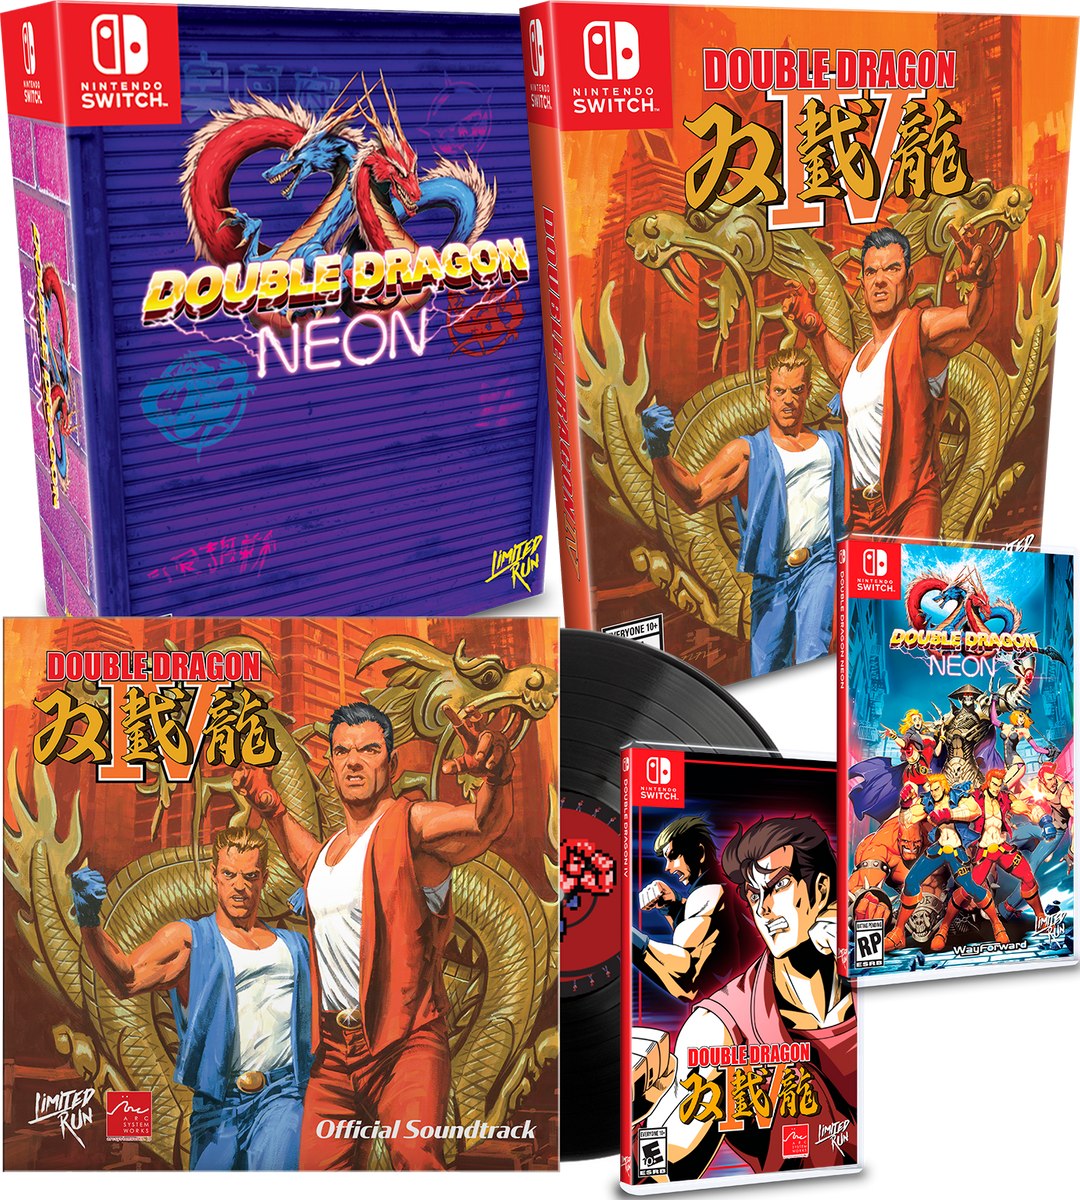 DOUBLE DRAGON NEON Brand New NINTENDO SWITCH Game Limited Run